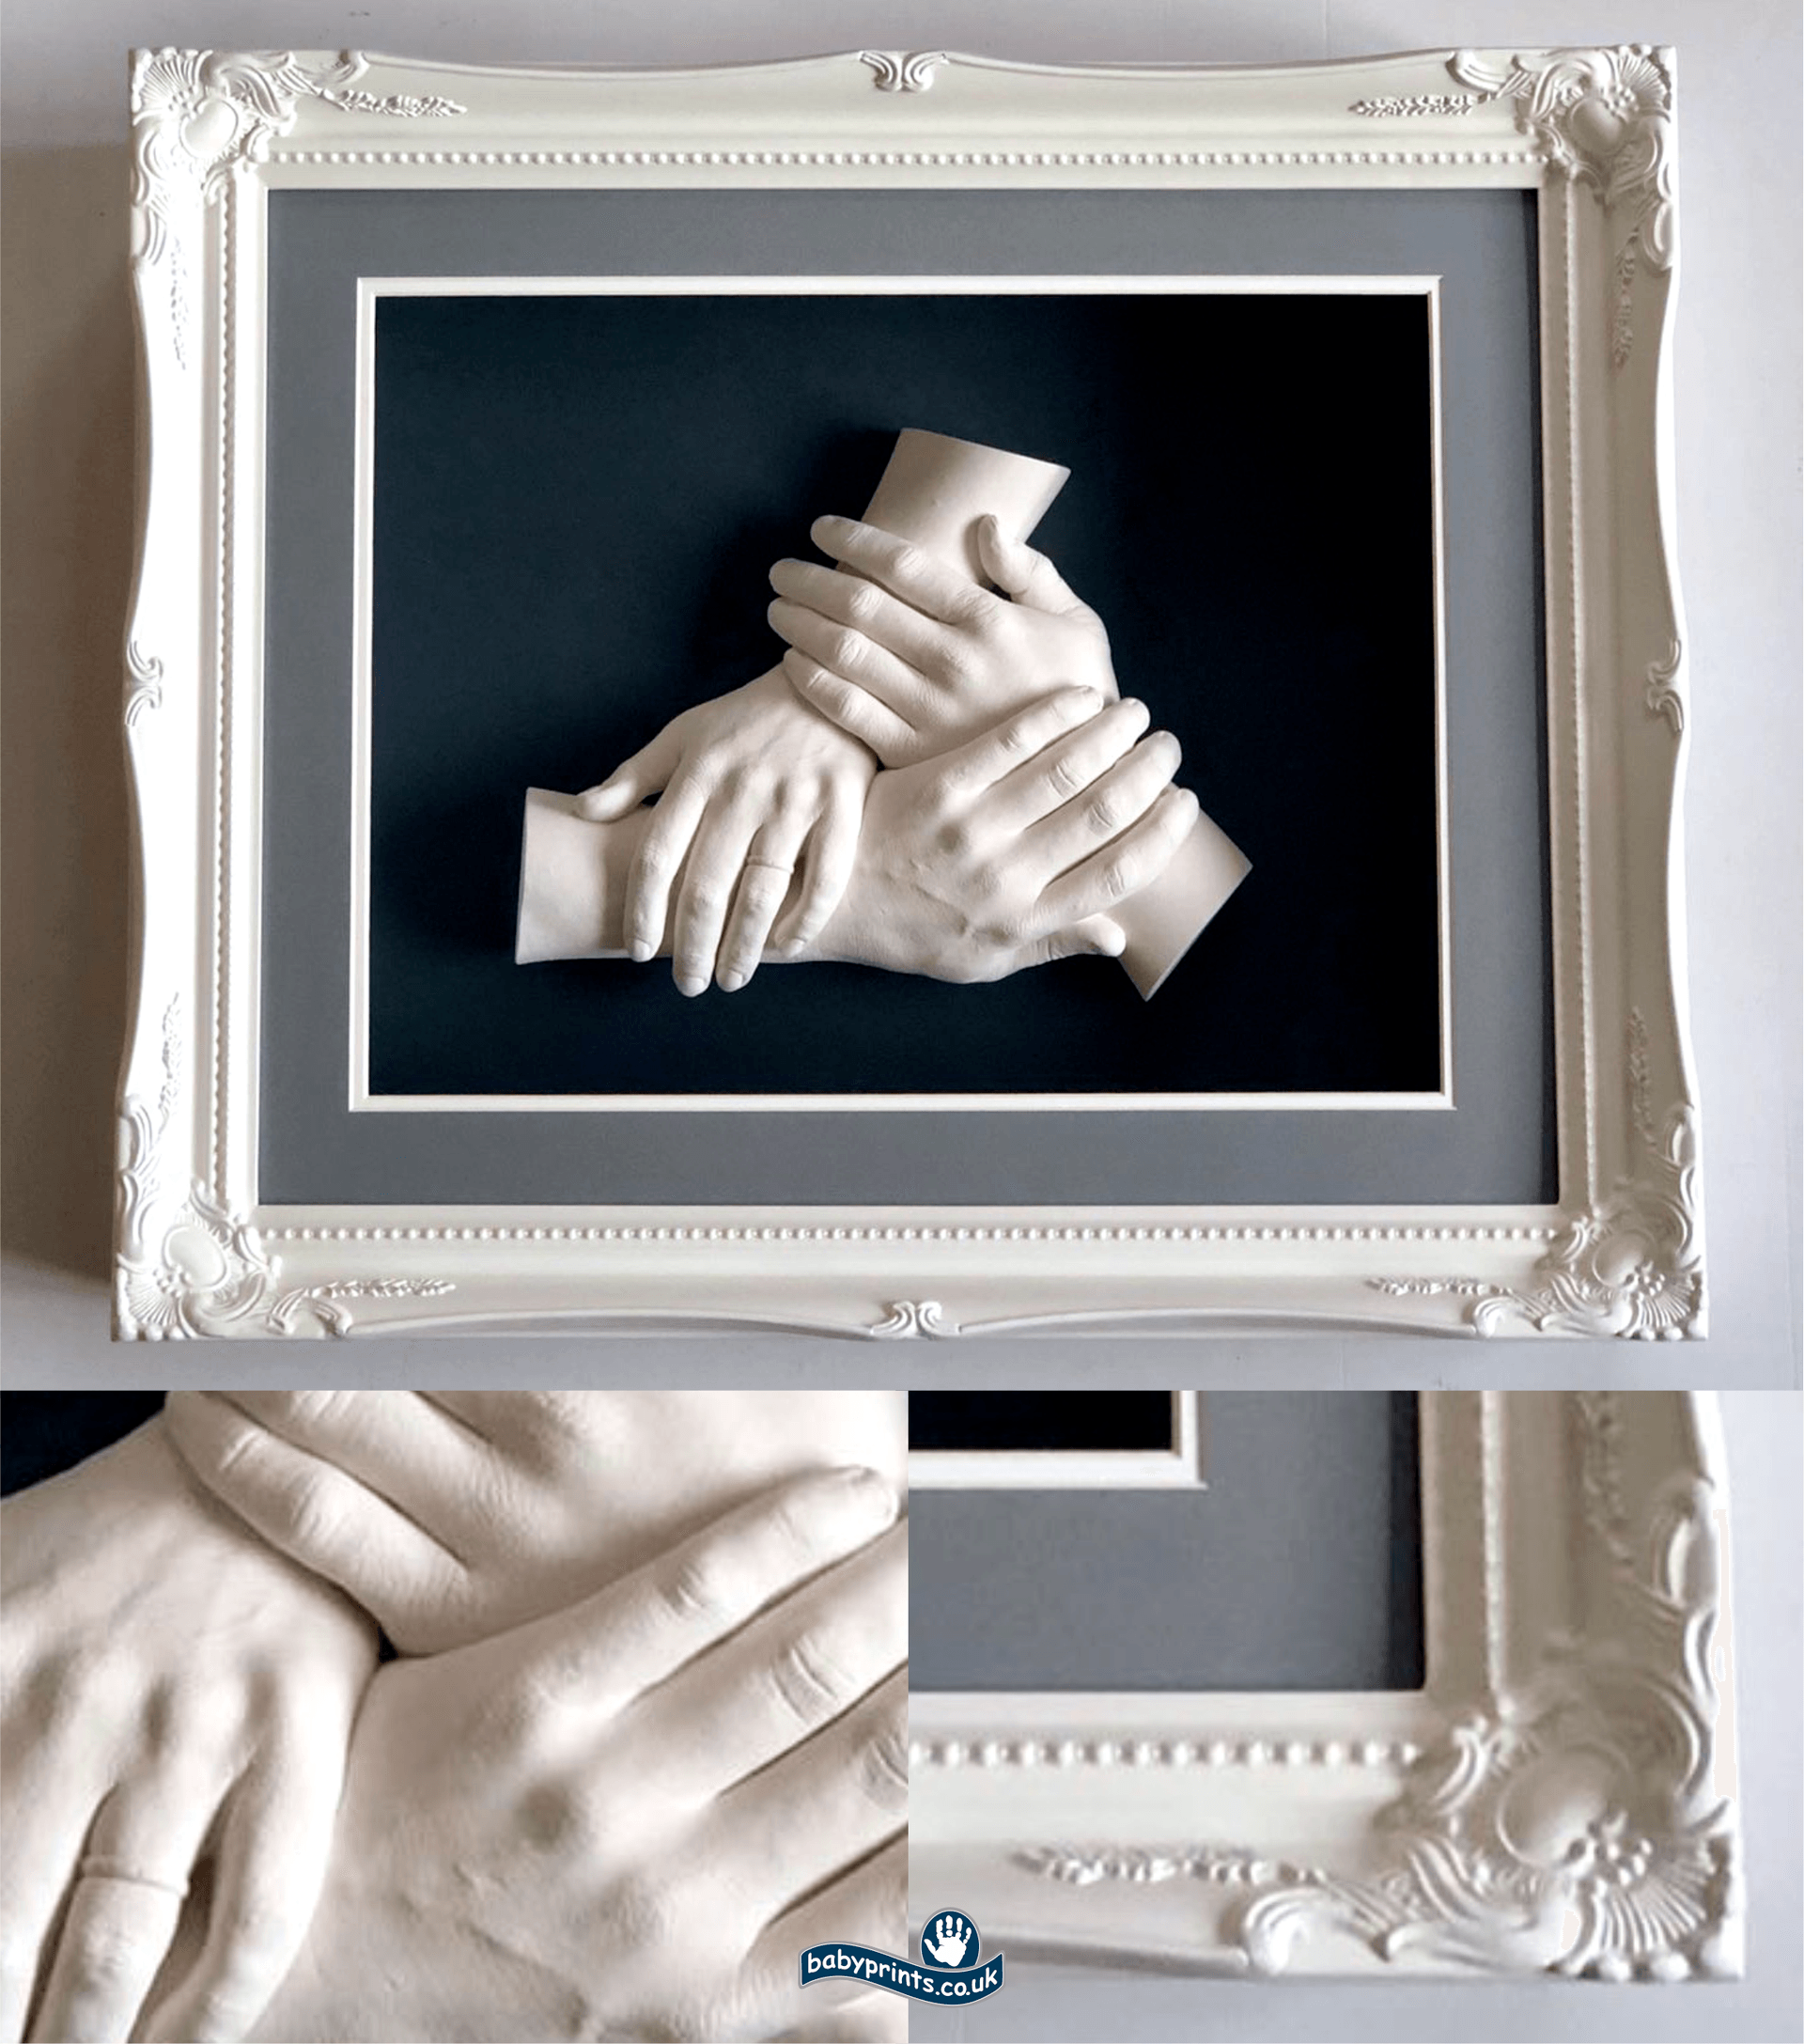 Family linked hands cast